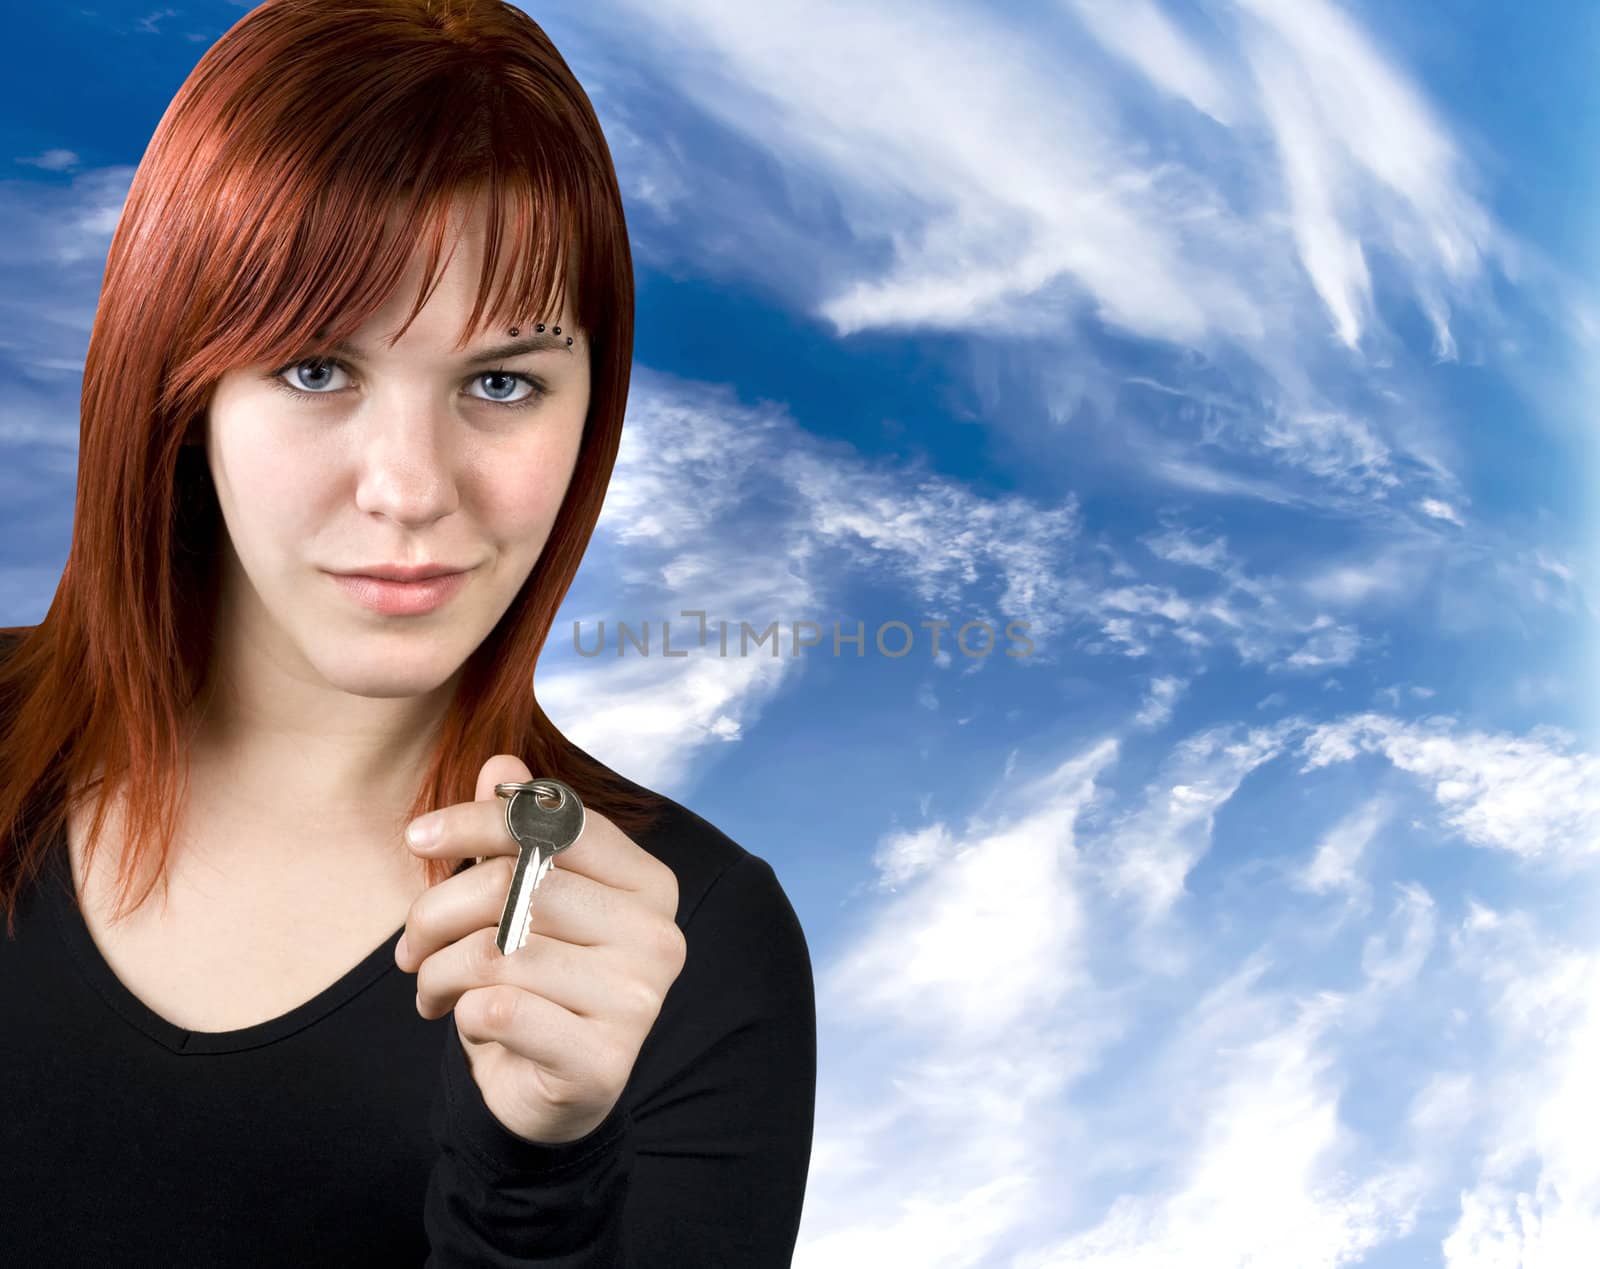 Cute redhead girl holding a key in her hands. Studio shot.